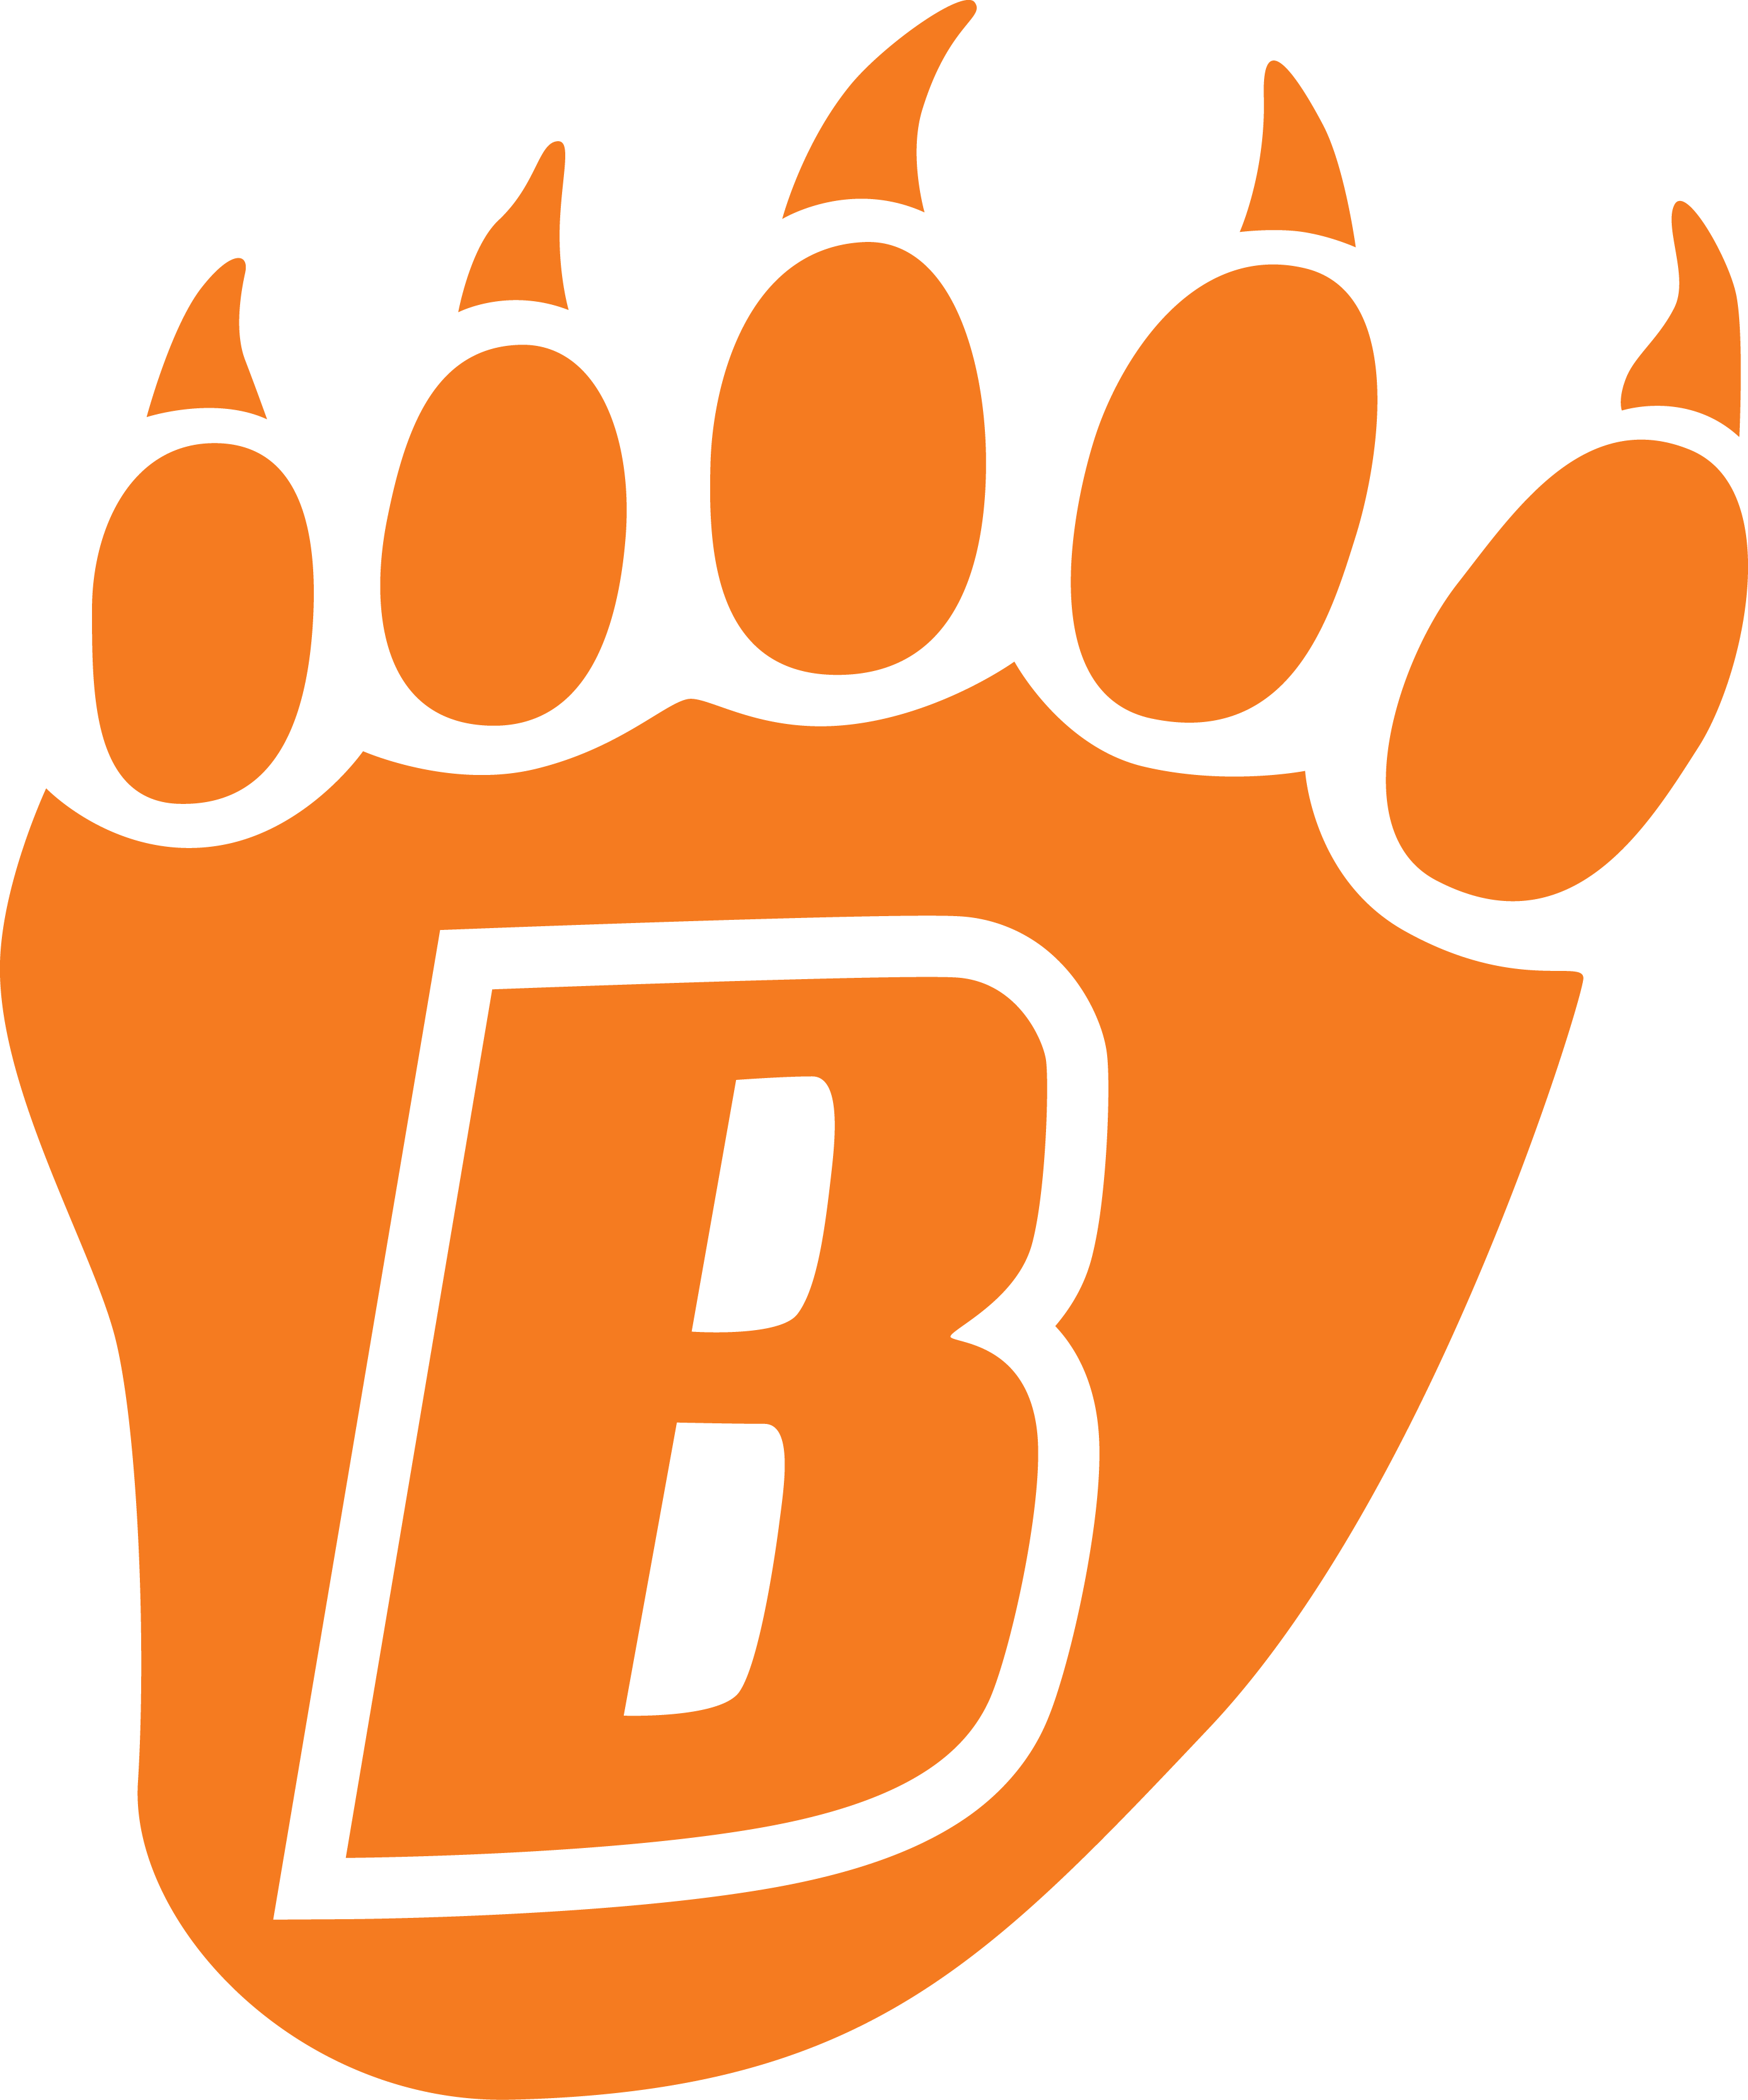 The Bear Paw Logo - Style Guide